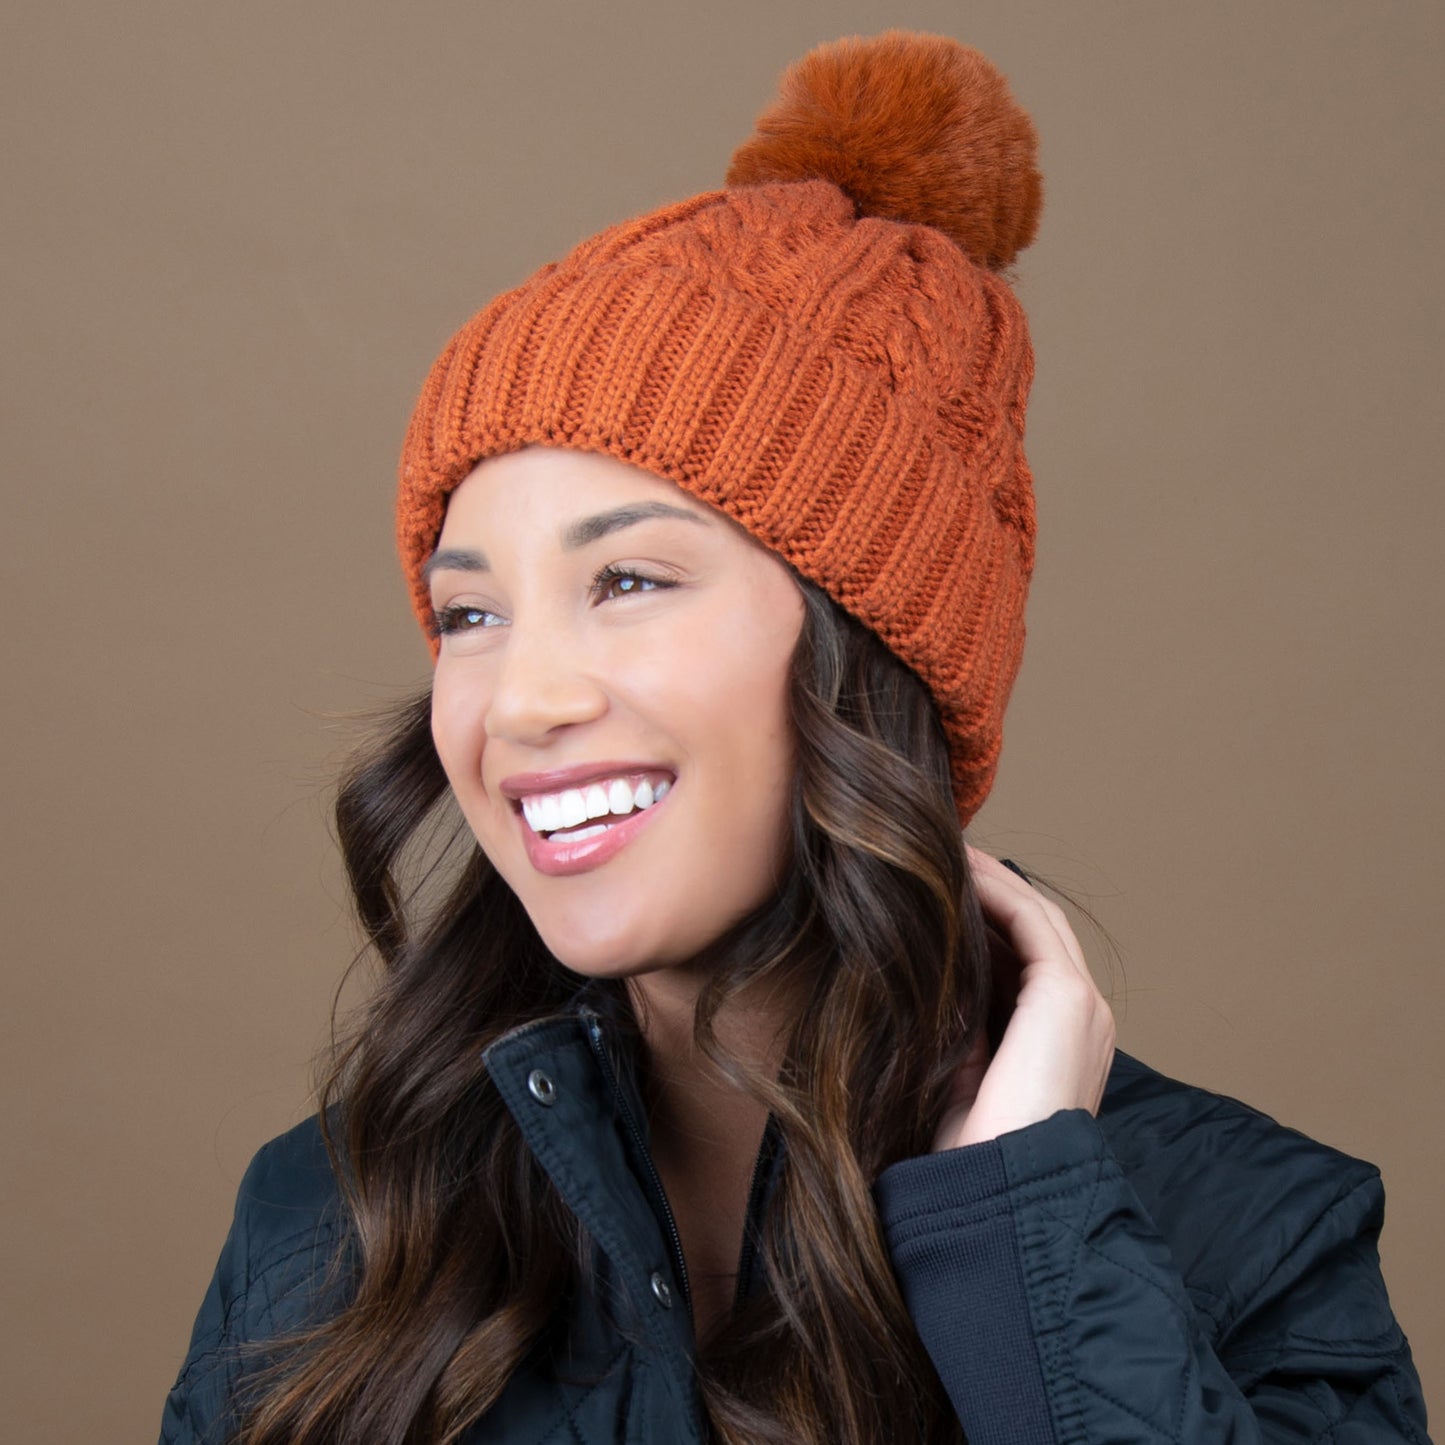 Sierra Cable Knit Pom Lined Beanie Hat